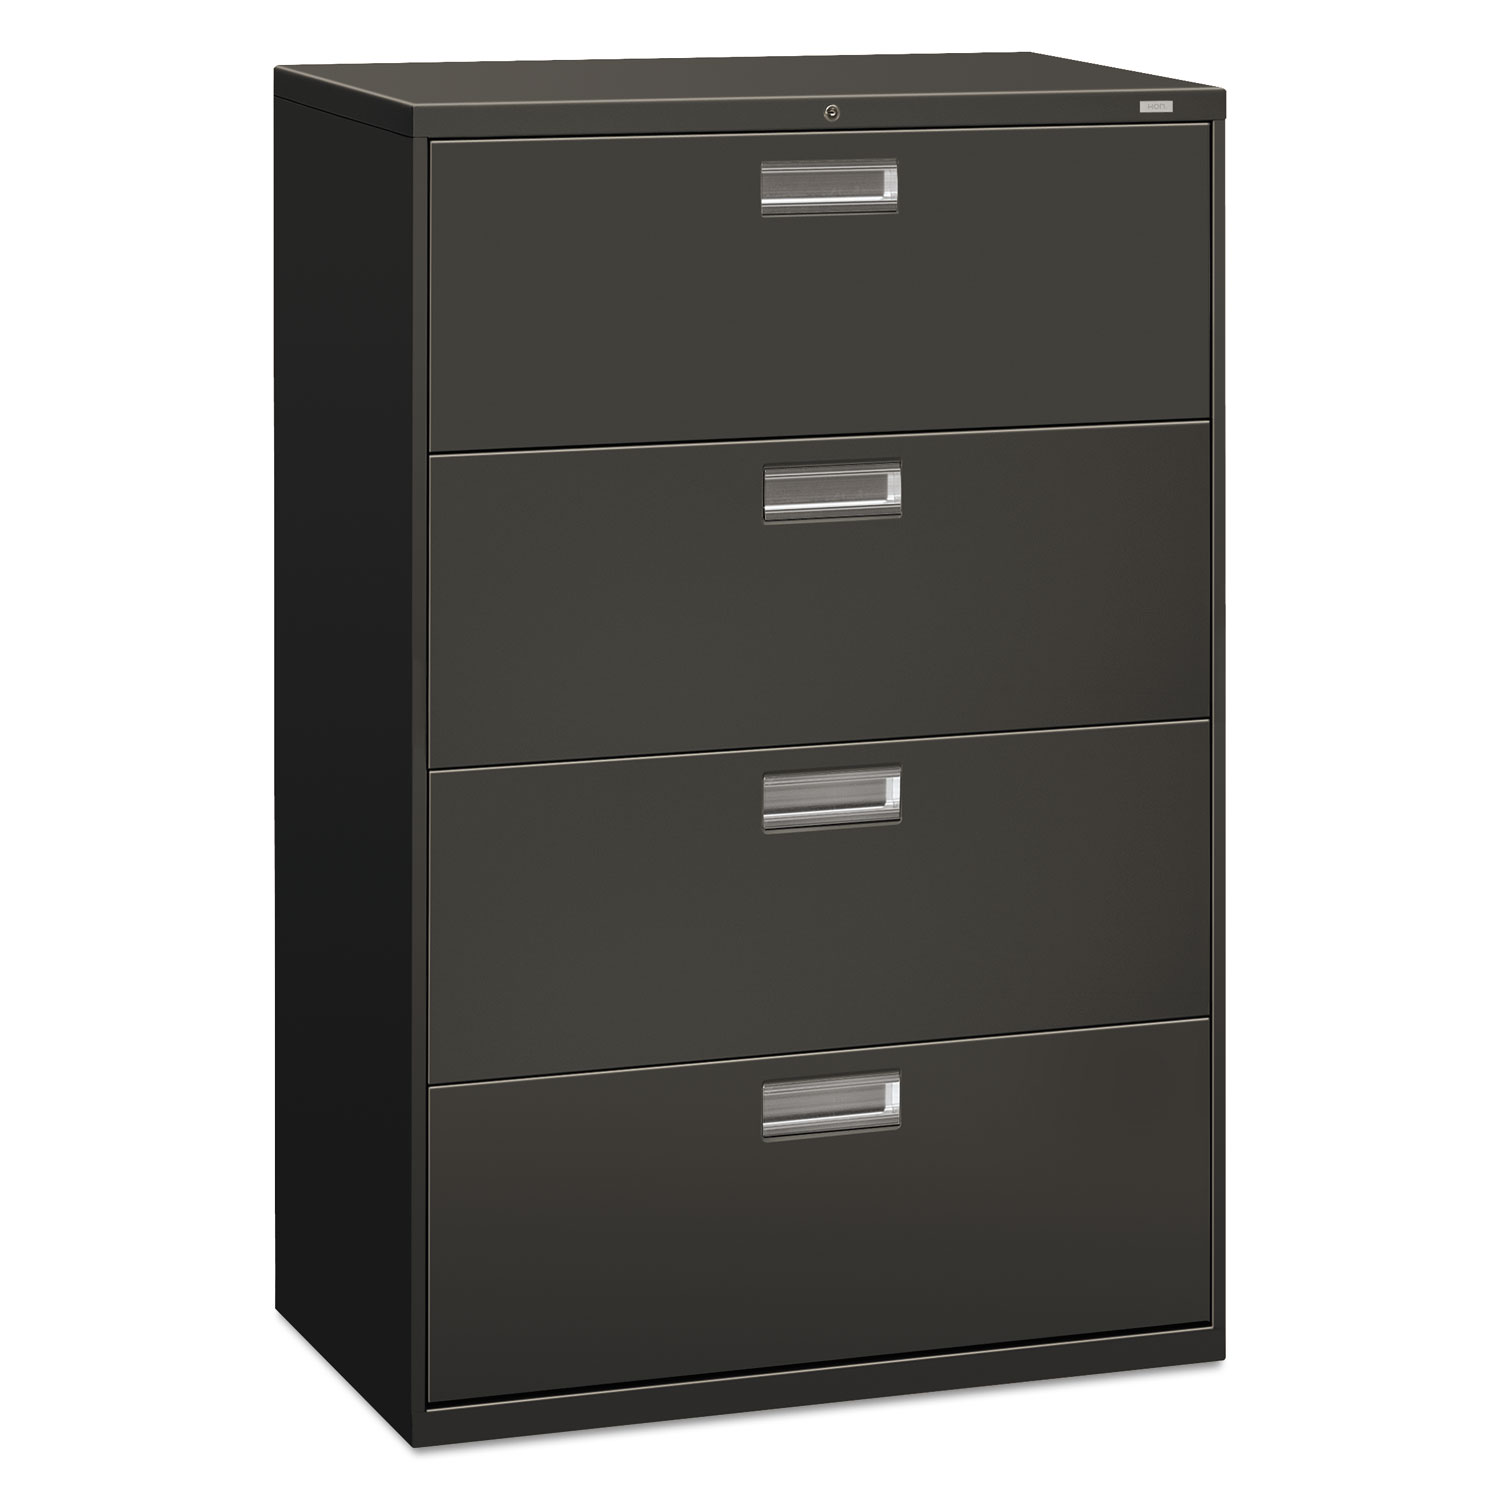  HON H684.L.S 600 Series Four-Drawer Lateral File, 36w x 18d x 52.5h, Charcoal (HON684LS) 